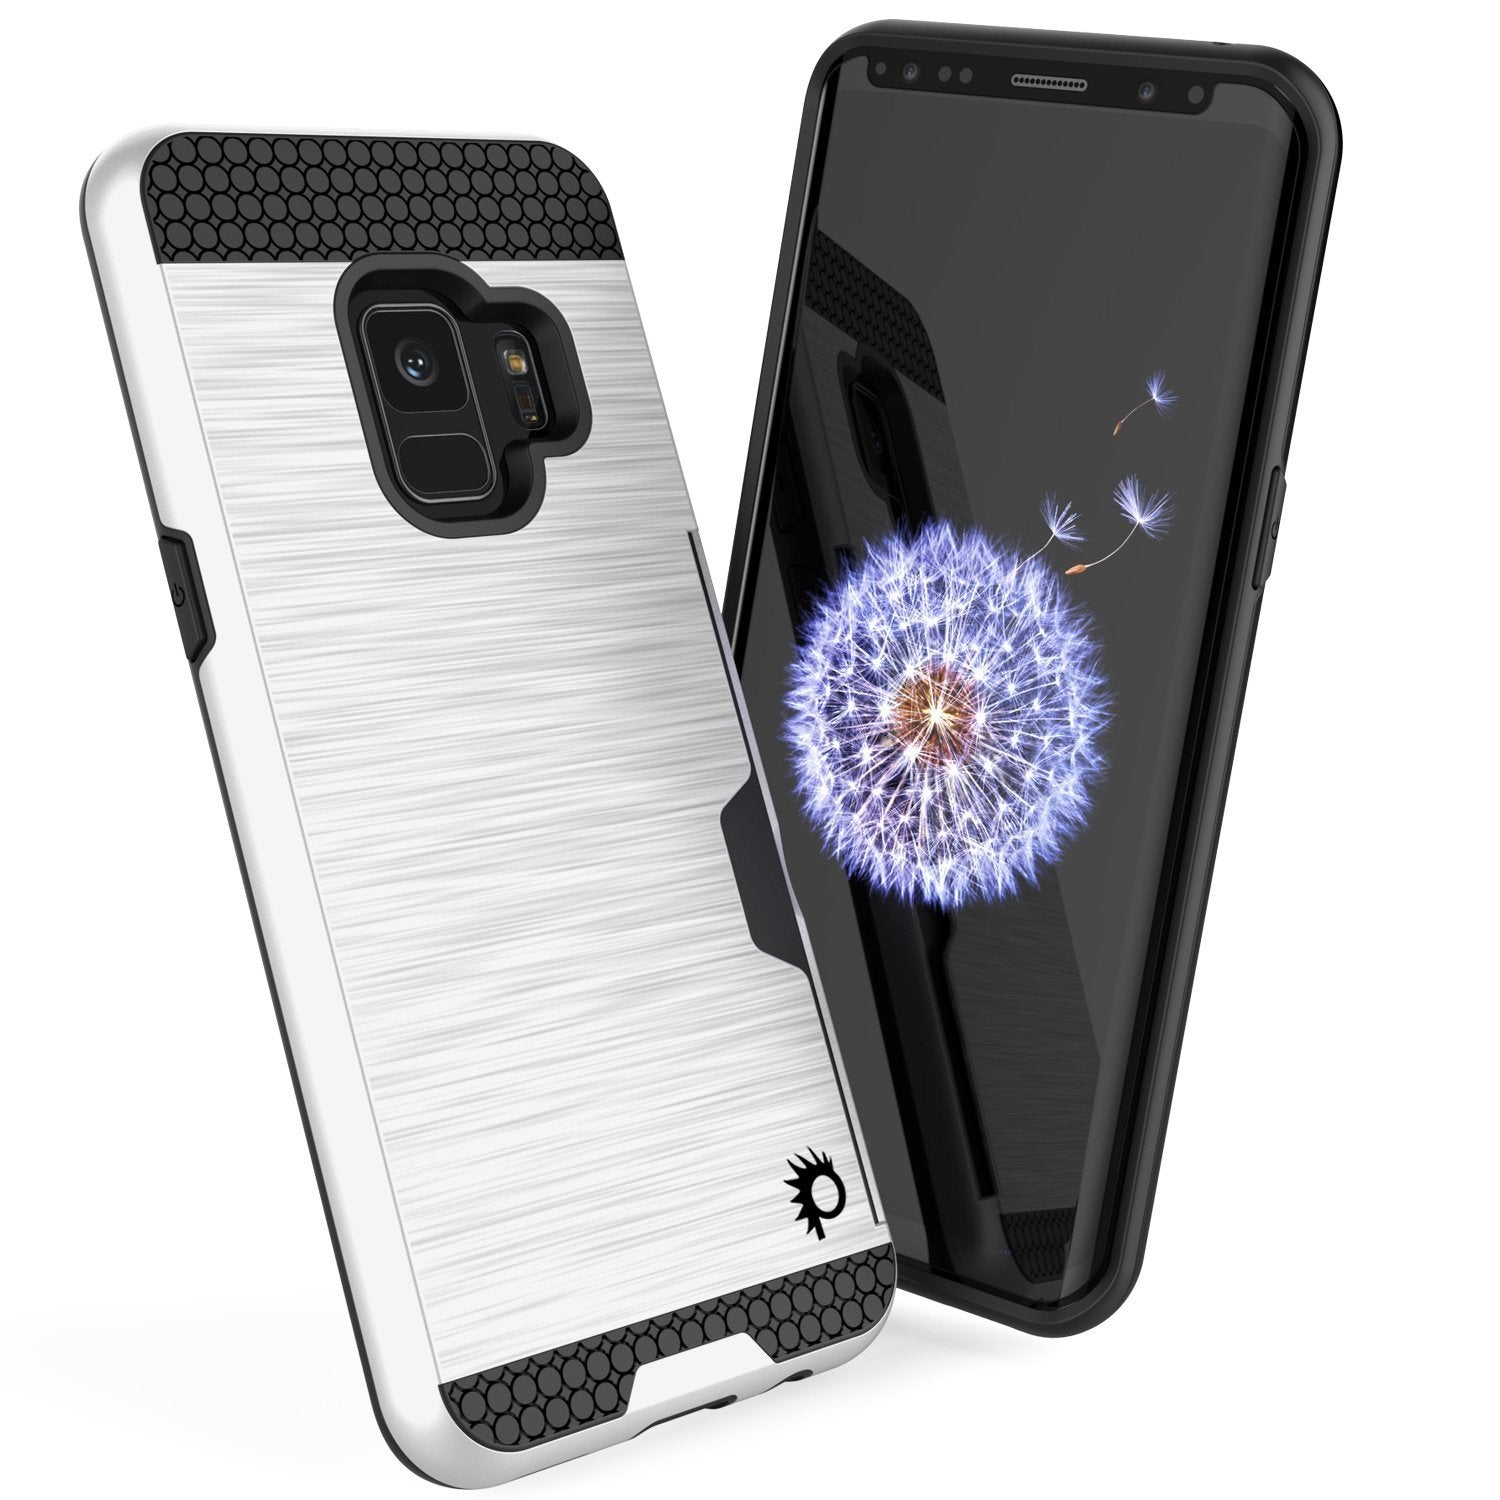 Galaxy S9 Case, PUNKcase [SLOT Series] [Slim Fit] Dual-Layer Armor Cover w/Integrated Anti-Shock System, Credit Card Slot & Screen Protector [White]